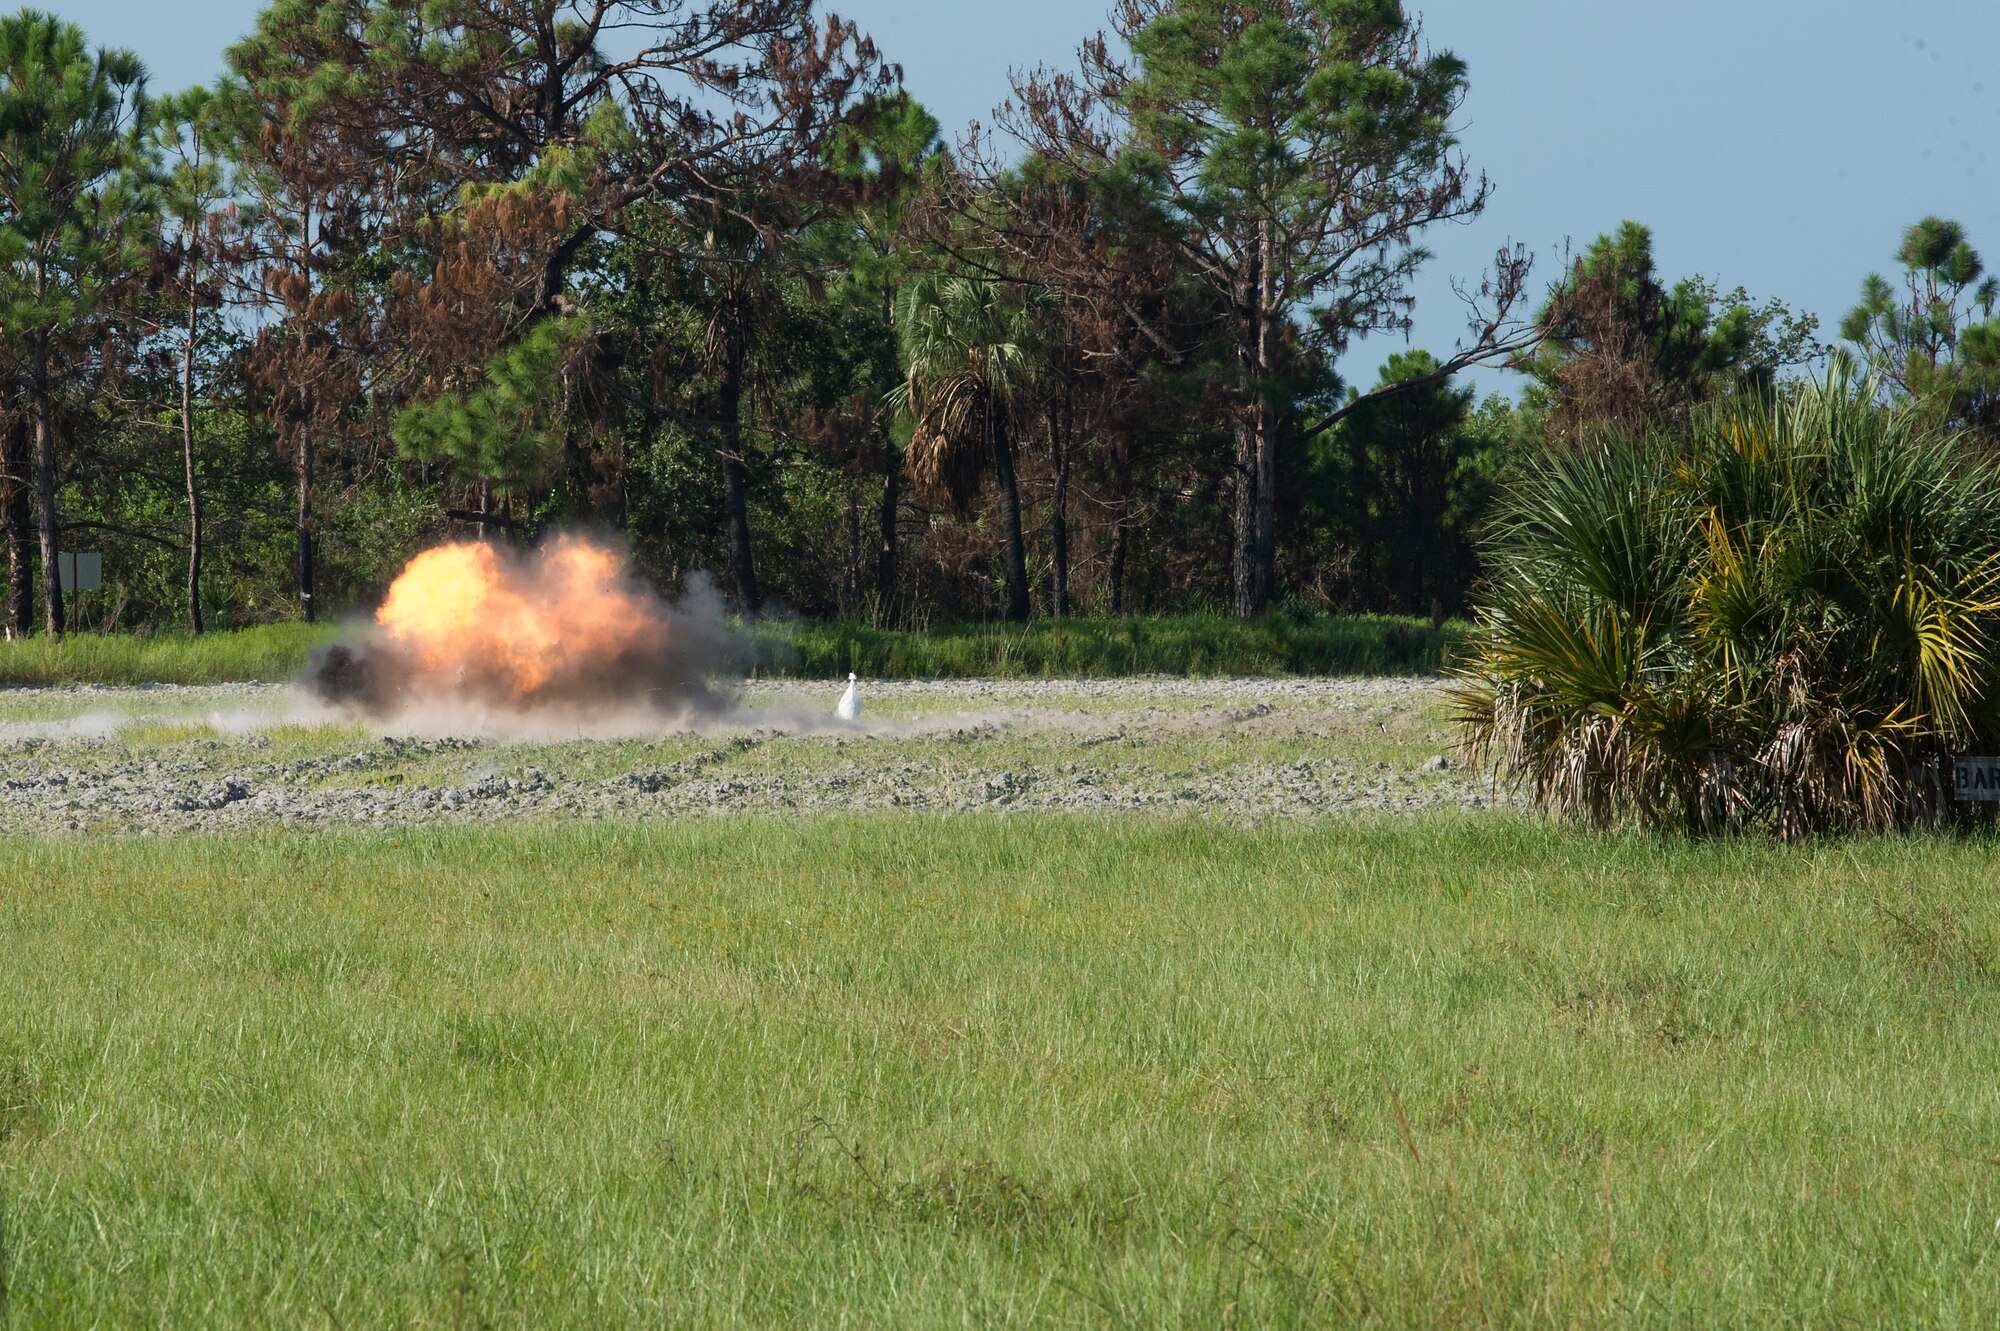 An explosive device detonates during a training organized by the 6th Civil Engineer Squadron Explosive Ordnance Disposal Flight for local Transportation Security Administration officers, Sept. 11, 2019, at MacDill Air Force Base, Fla.  (U.S. Air Force photo by Airman 1st Class Shannon Bowman)